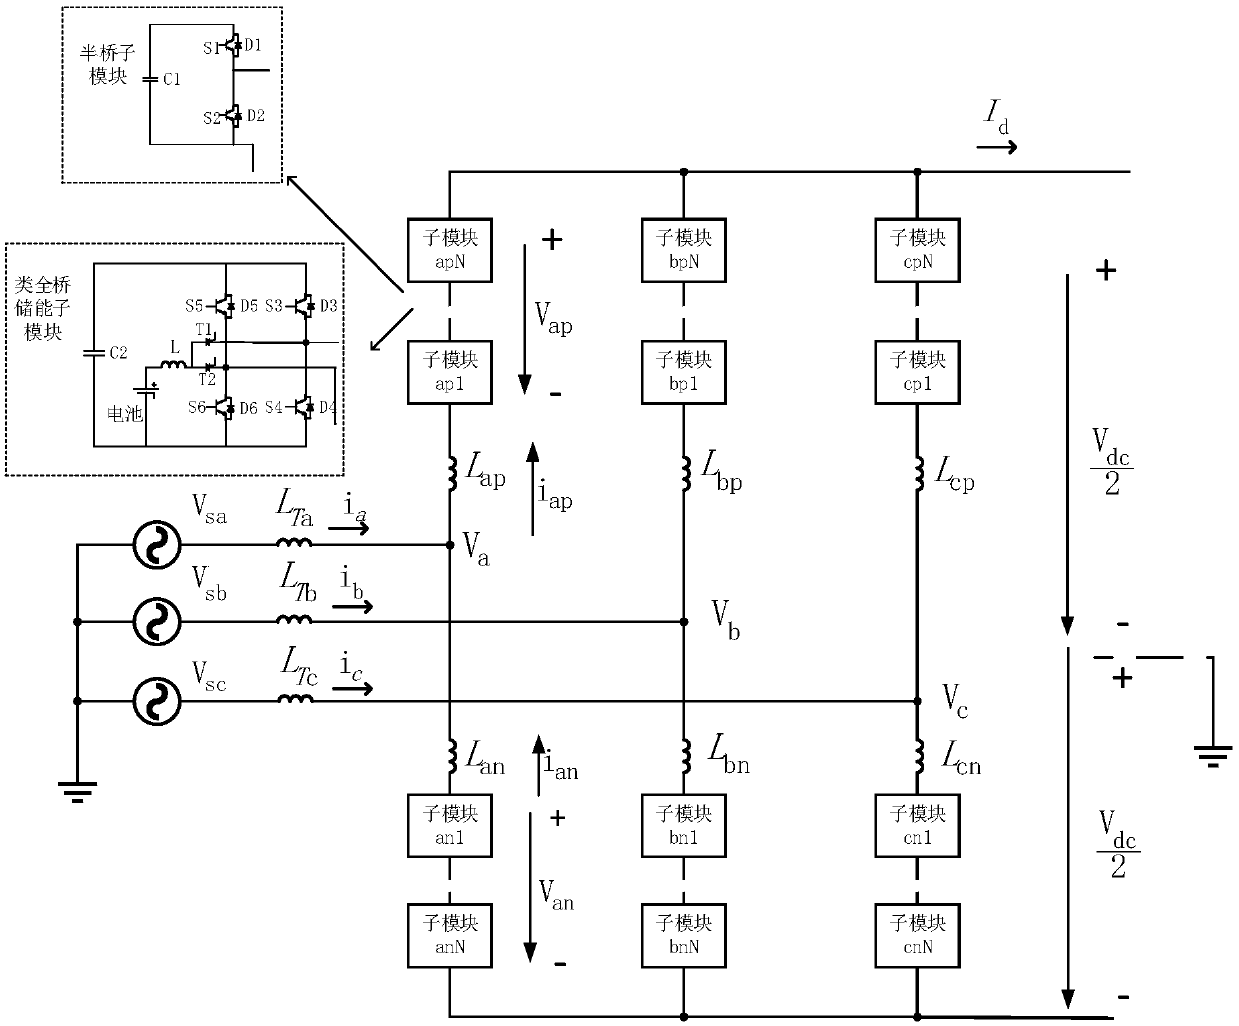 A control method for energy storage converter topology with fault ride-through capability